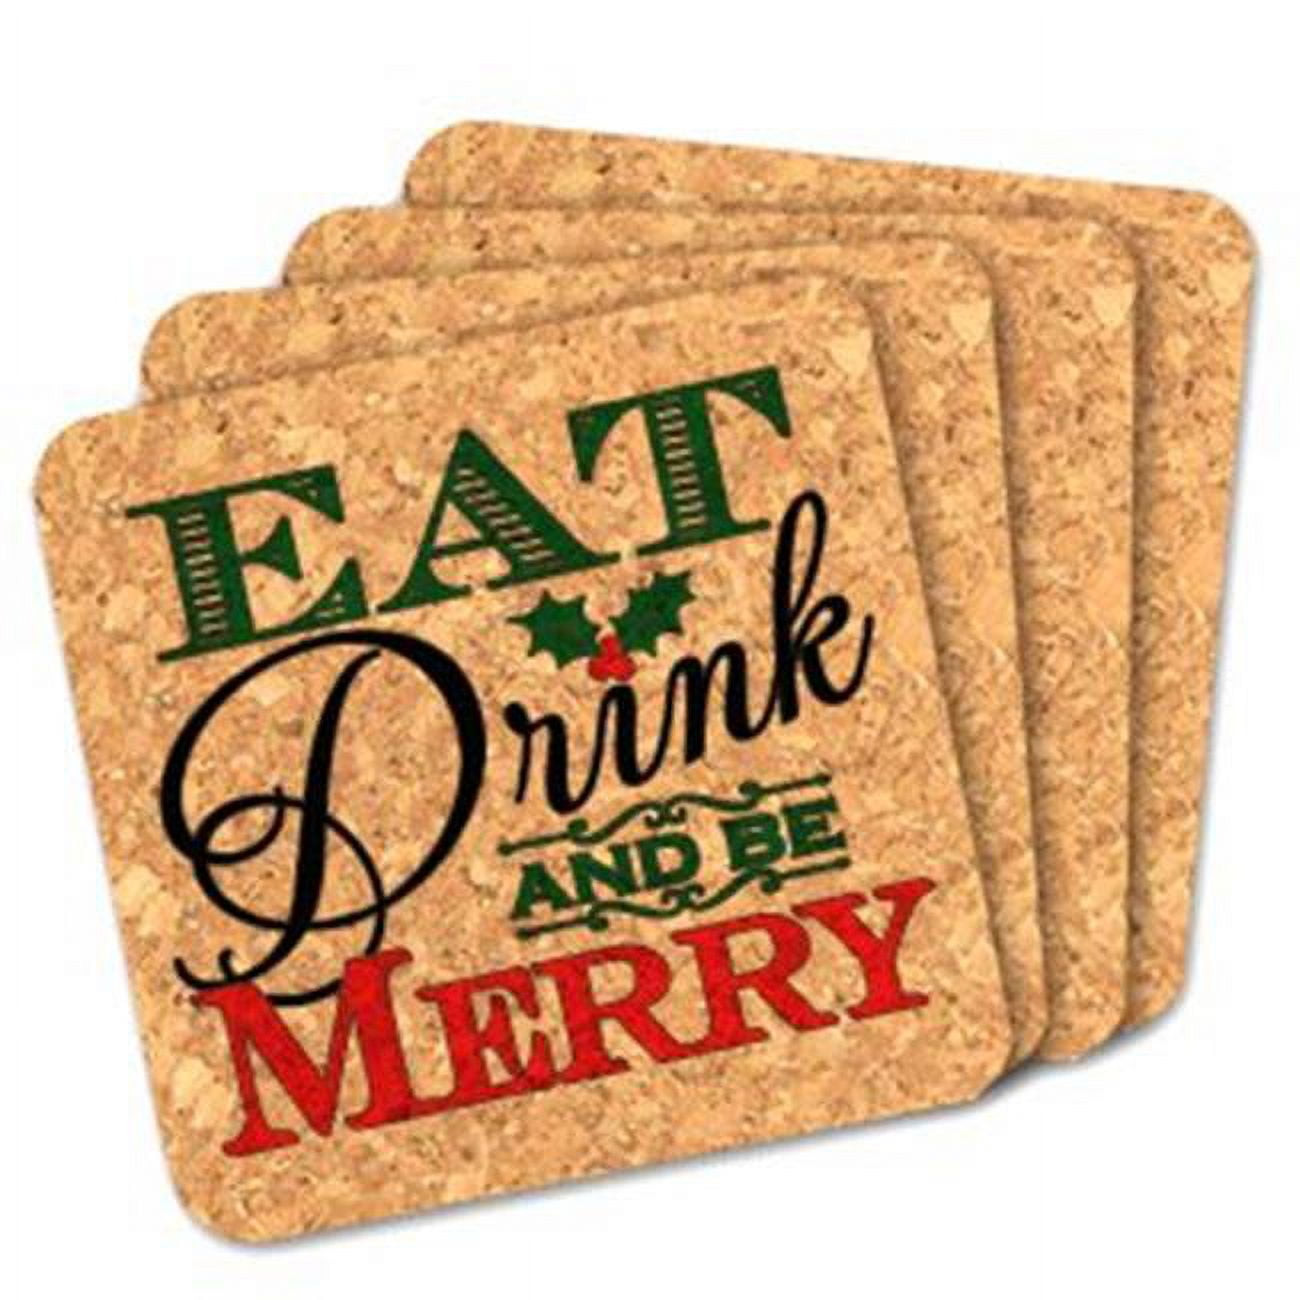 8407239 4 X 4 In. Eat Drink & Be Merry Square Cork Coasters - Set Of 4